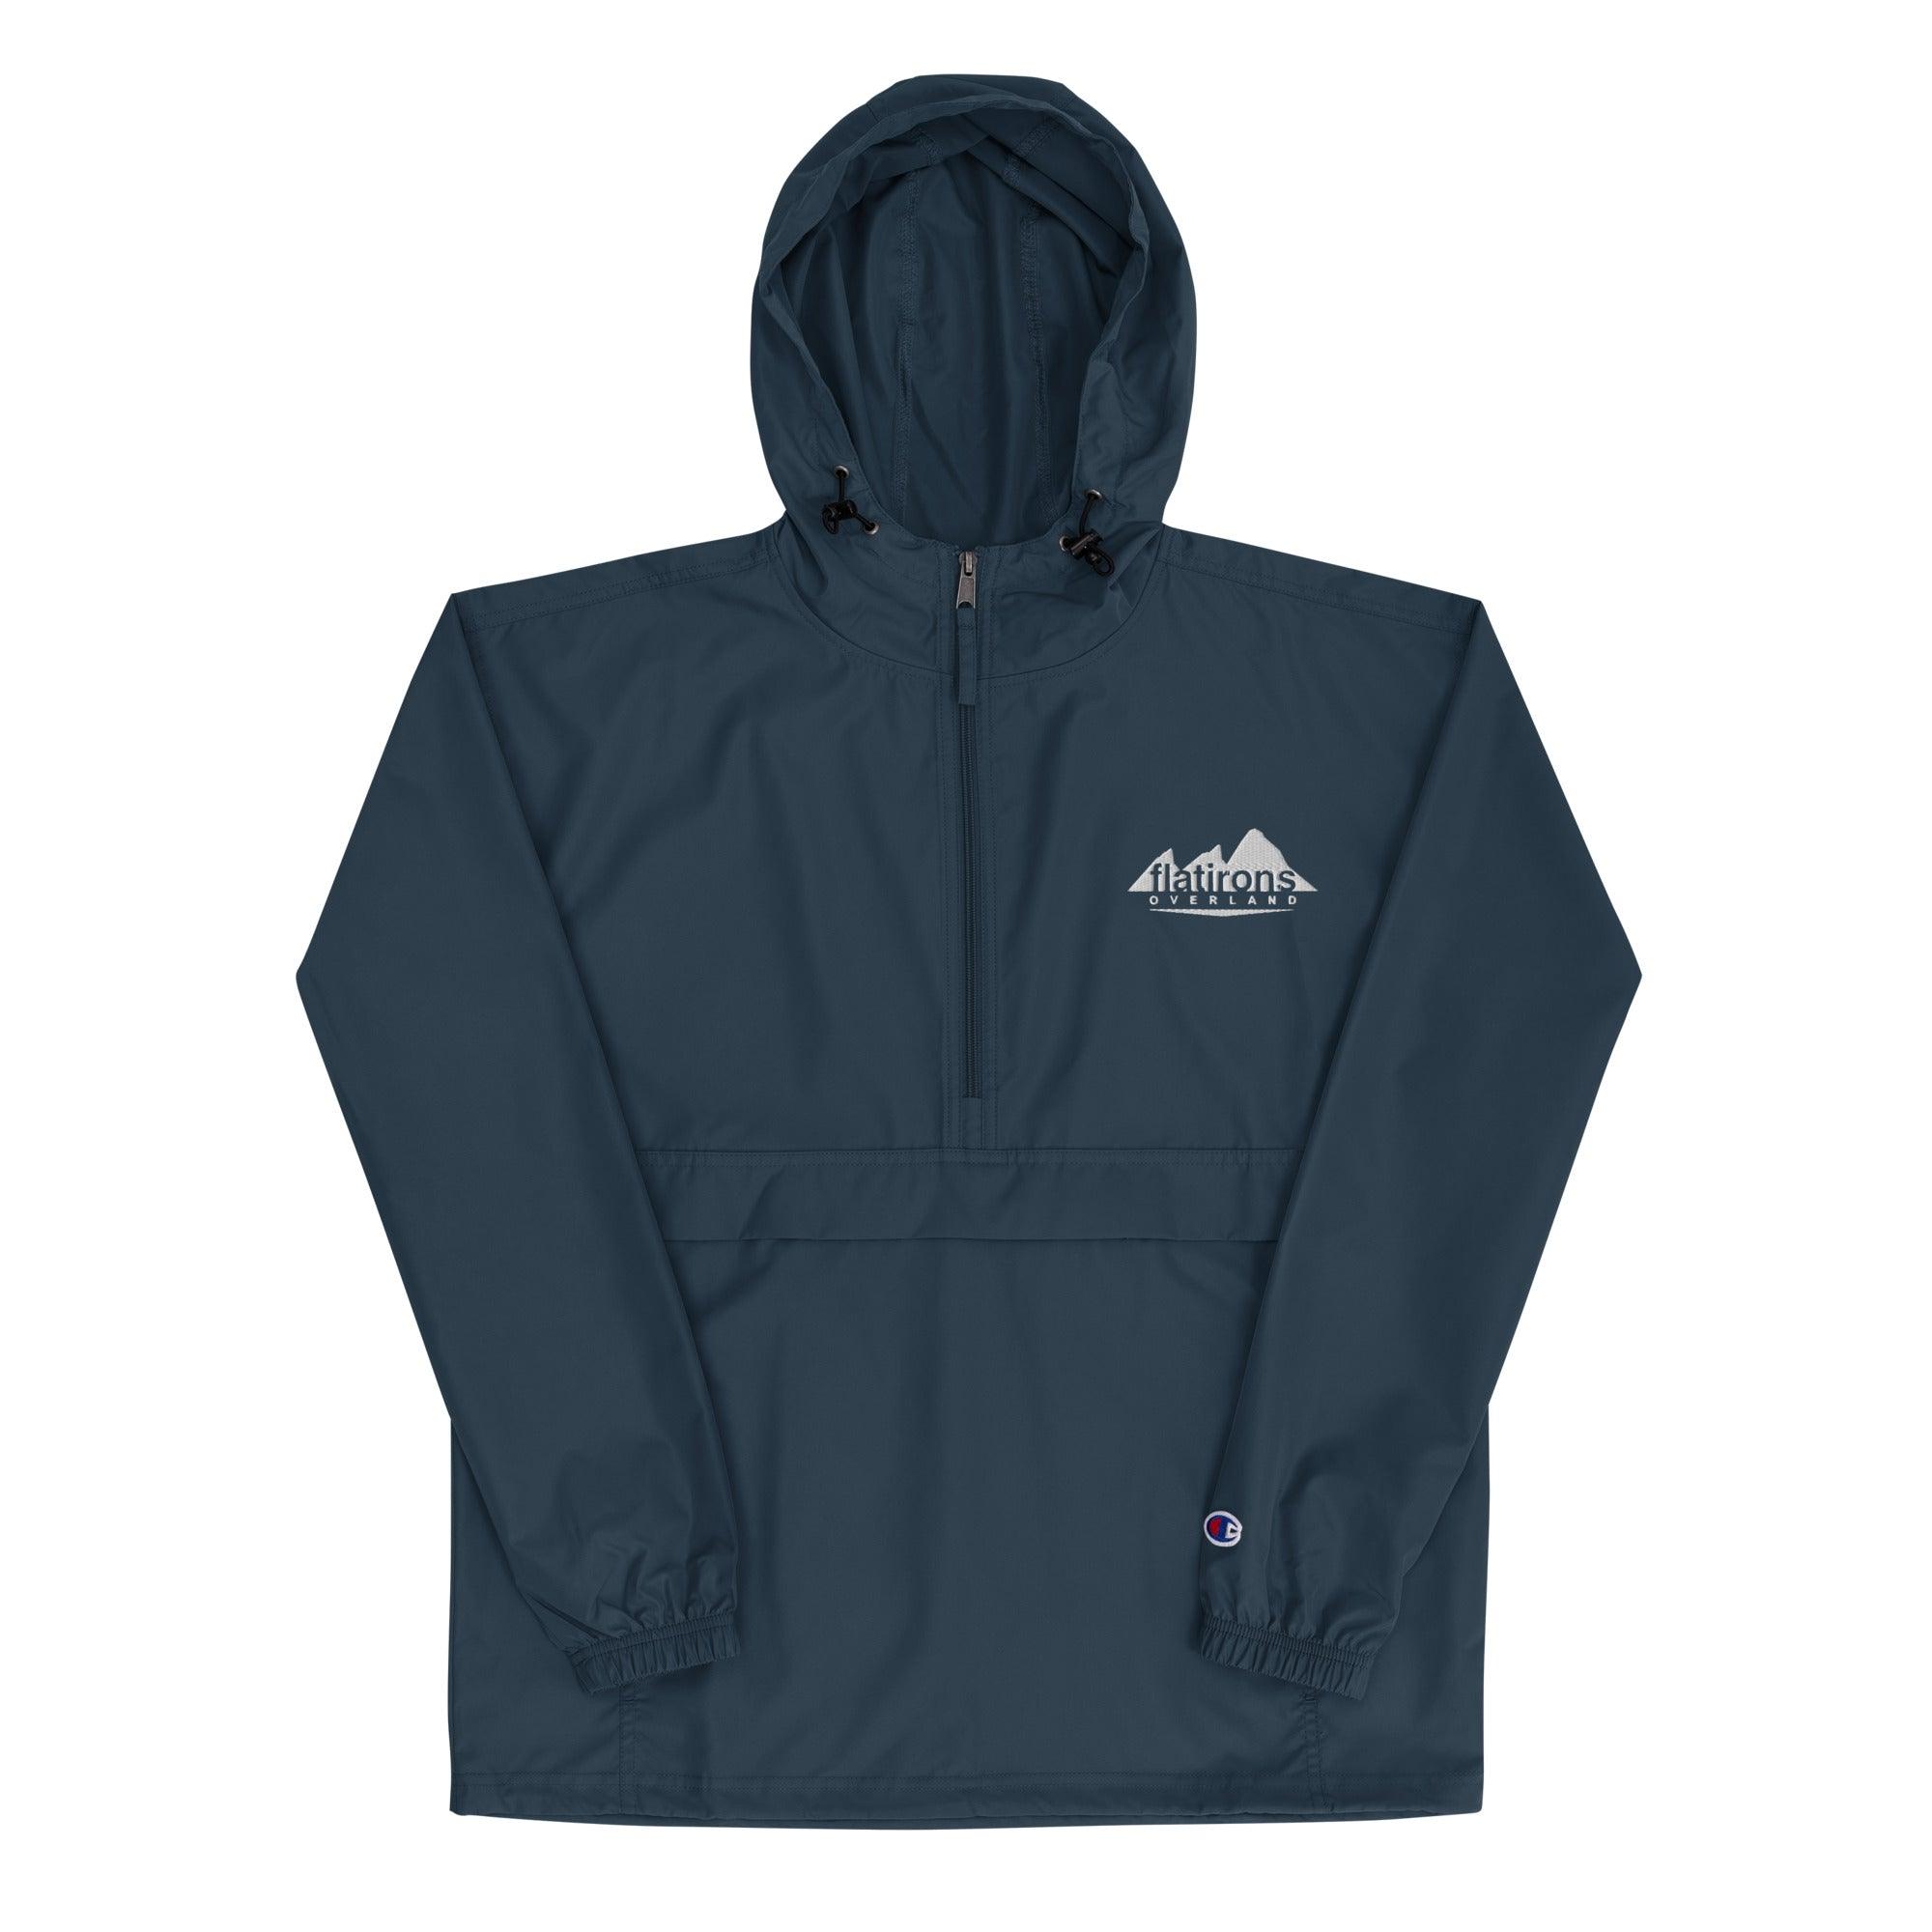 Embroidered Champion Packable Jacket - Flatirons Overland